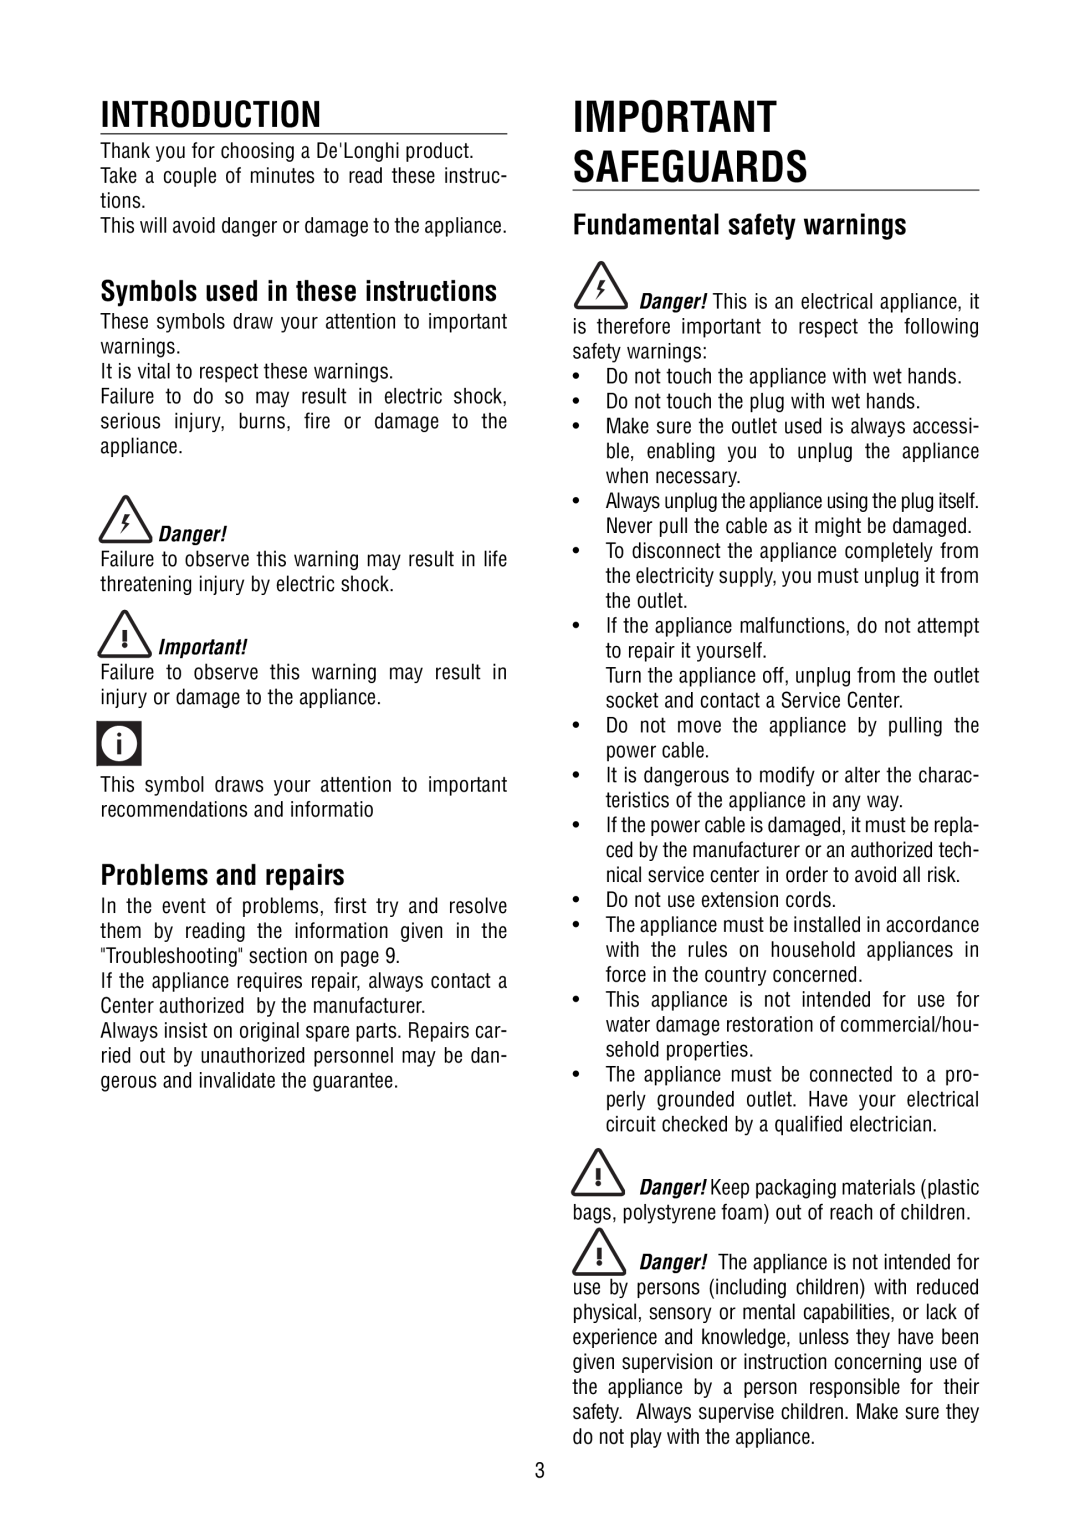 DeLonghi DD50P, DD40P, DD45P Safeguards, Introduction, Symbols used in these instructions, Problems and repairs, Danger 